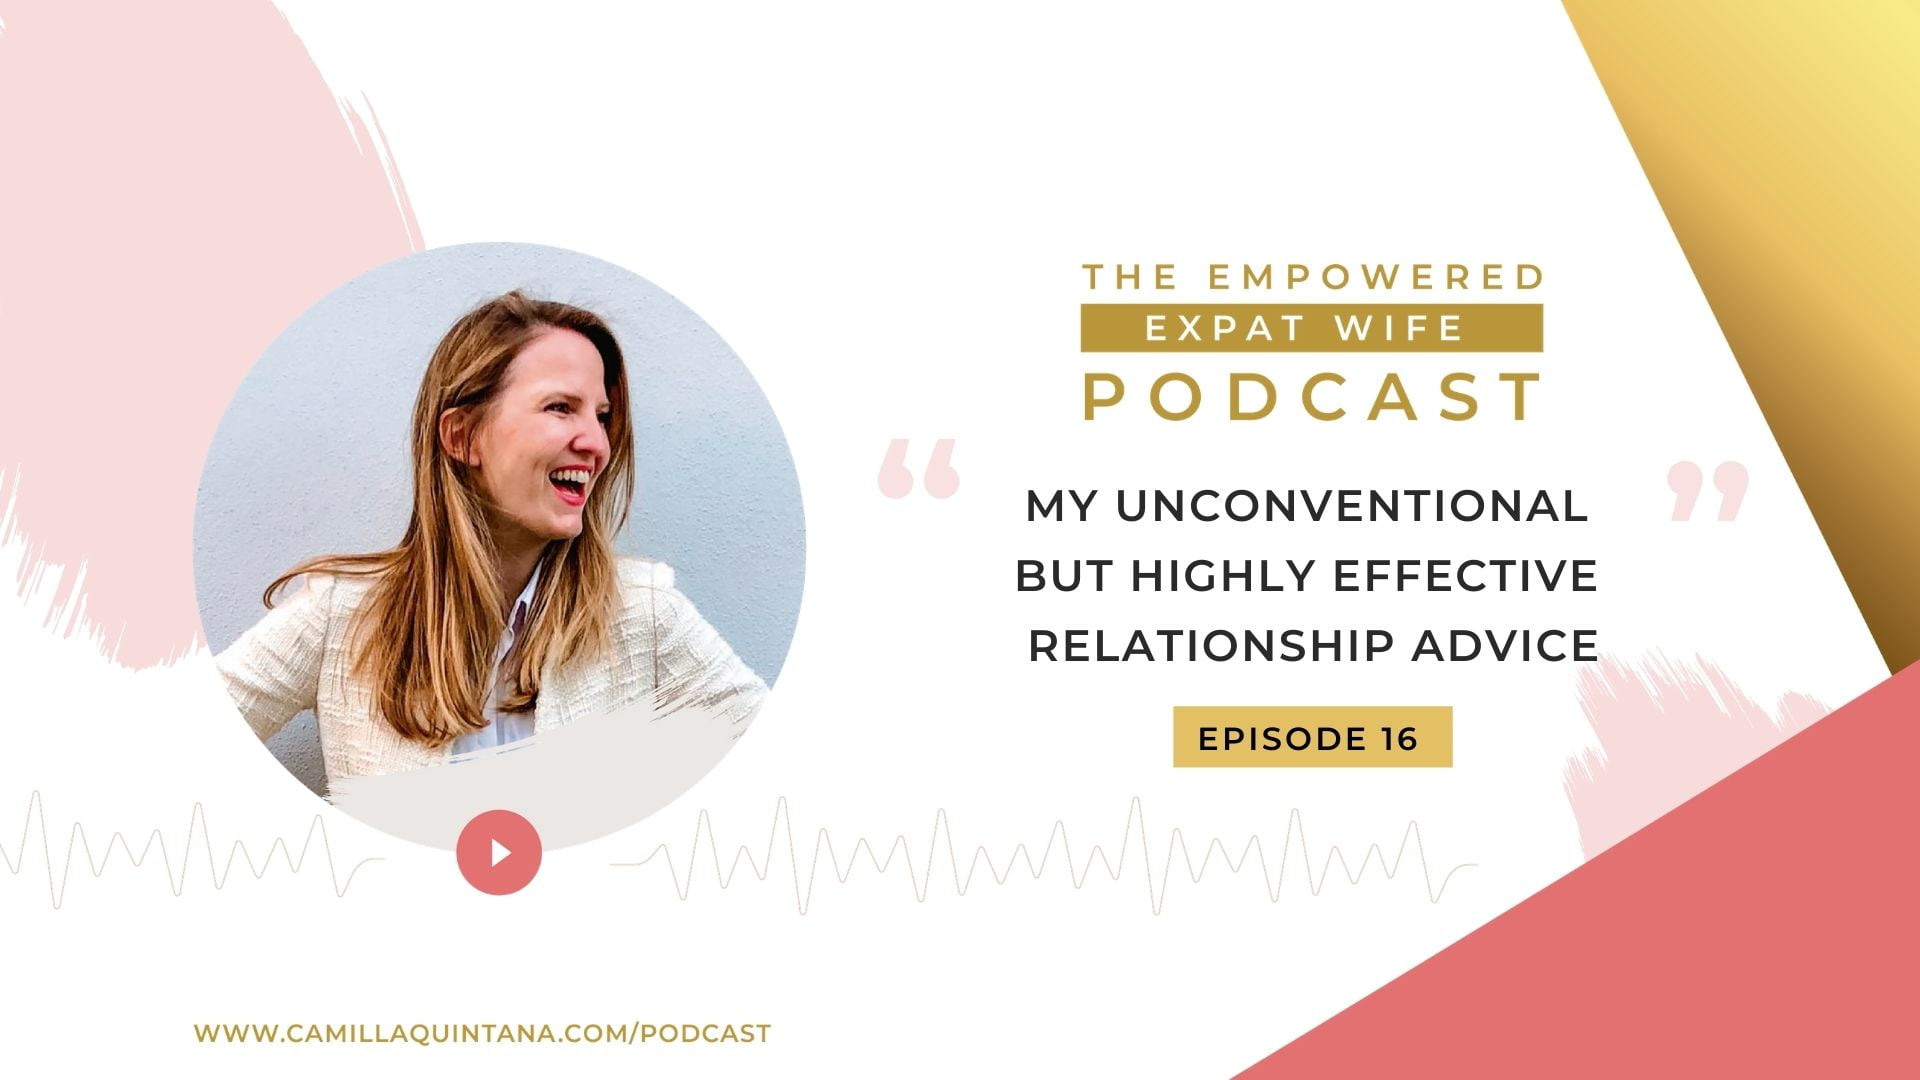 Episode 16 – My Unconventional but Highly Effective Relationship Advice